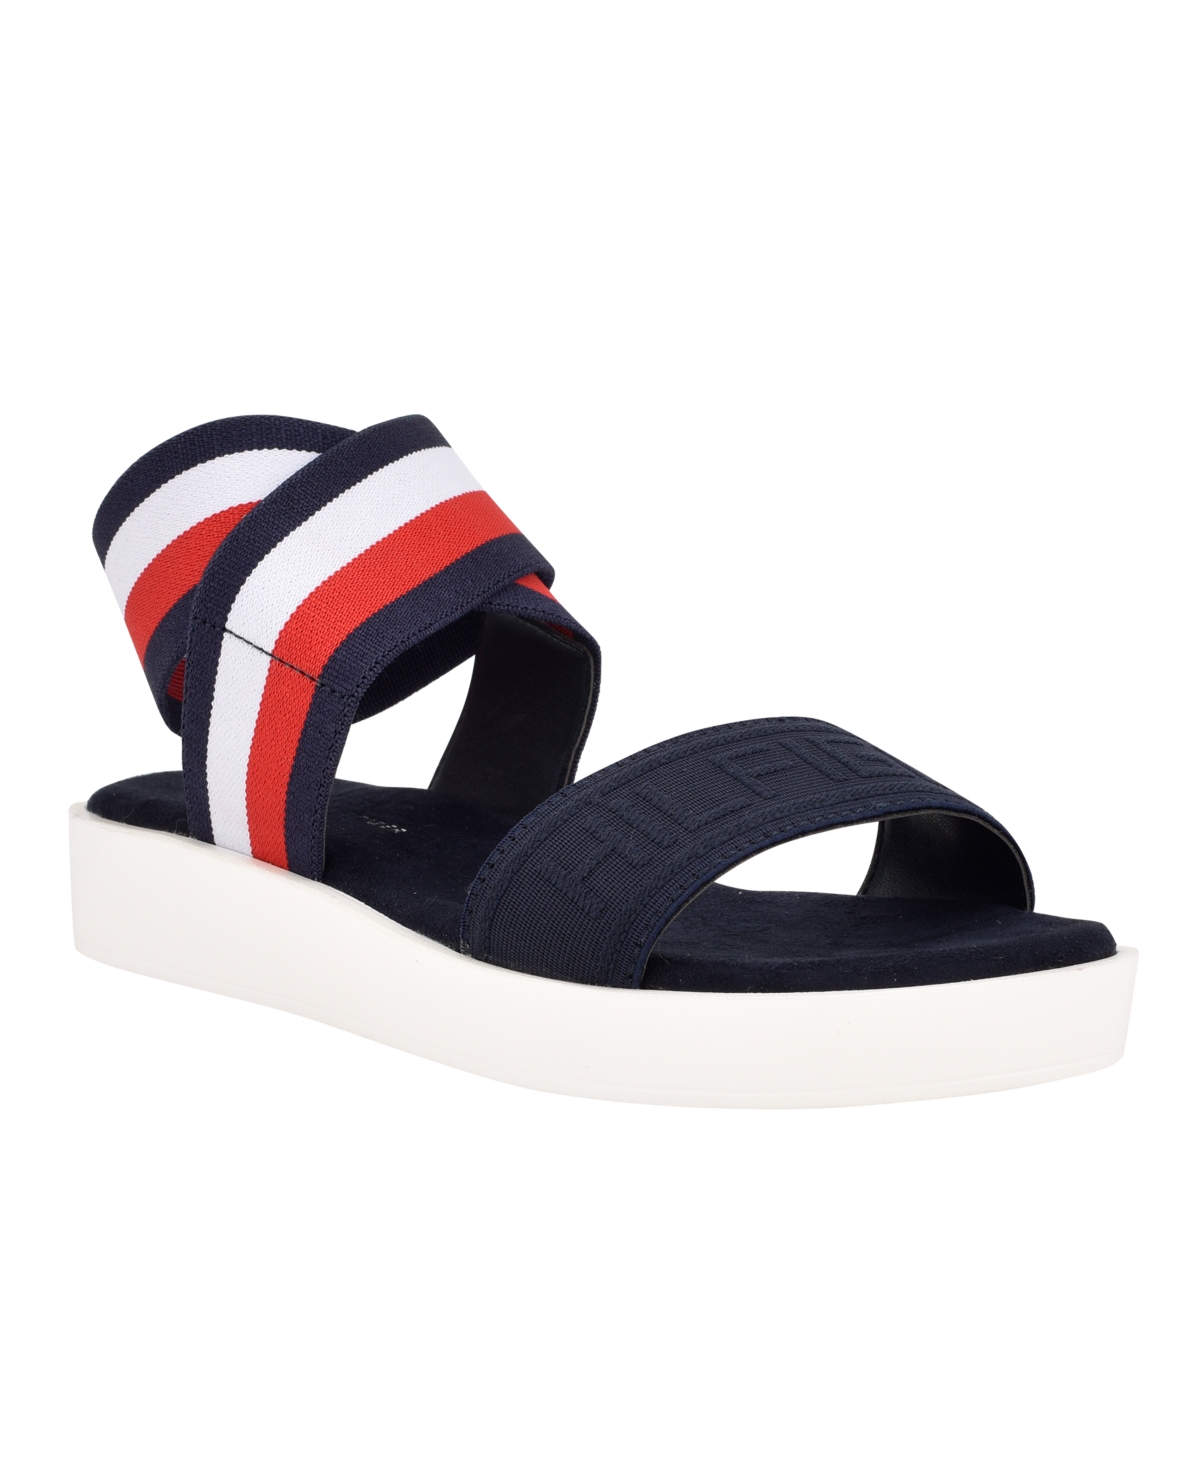 UPC 195182475033 product image for Tommy Hilfiger Women's Springi Stretch Ankle Wrap Sandals Women's Shoes | upcitemdb.com